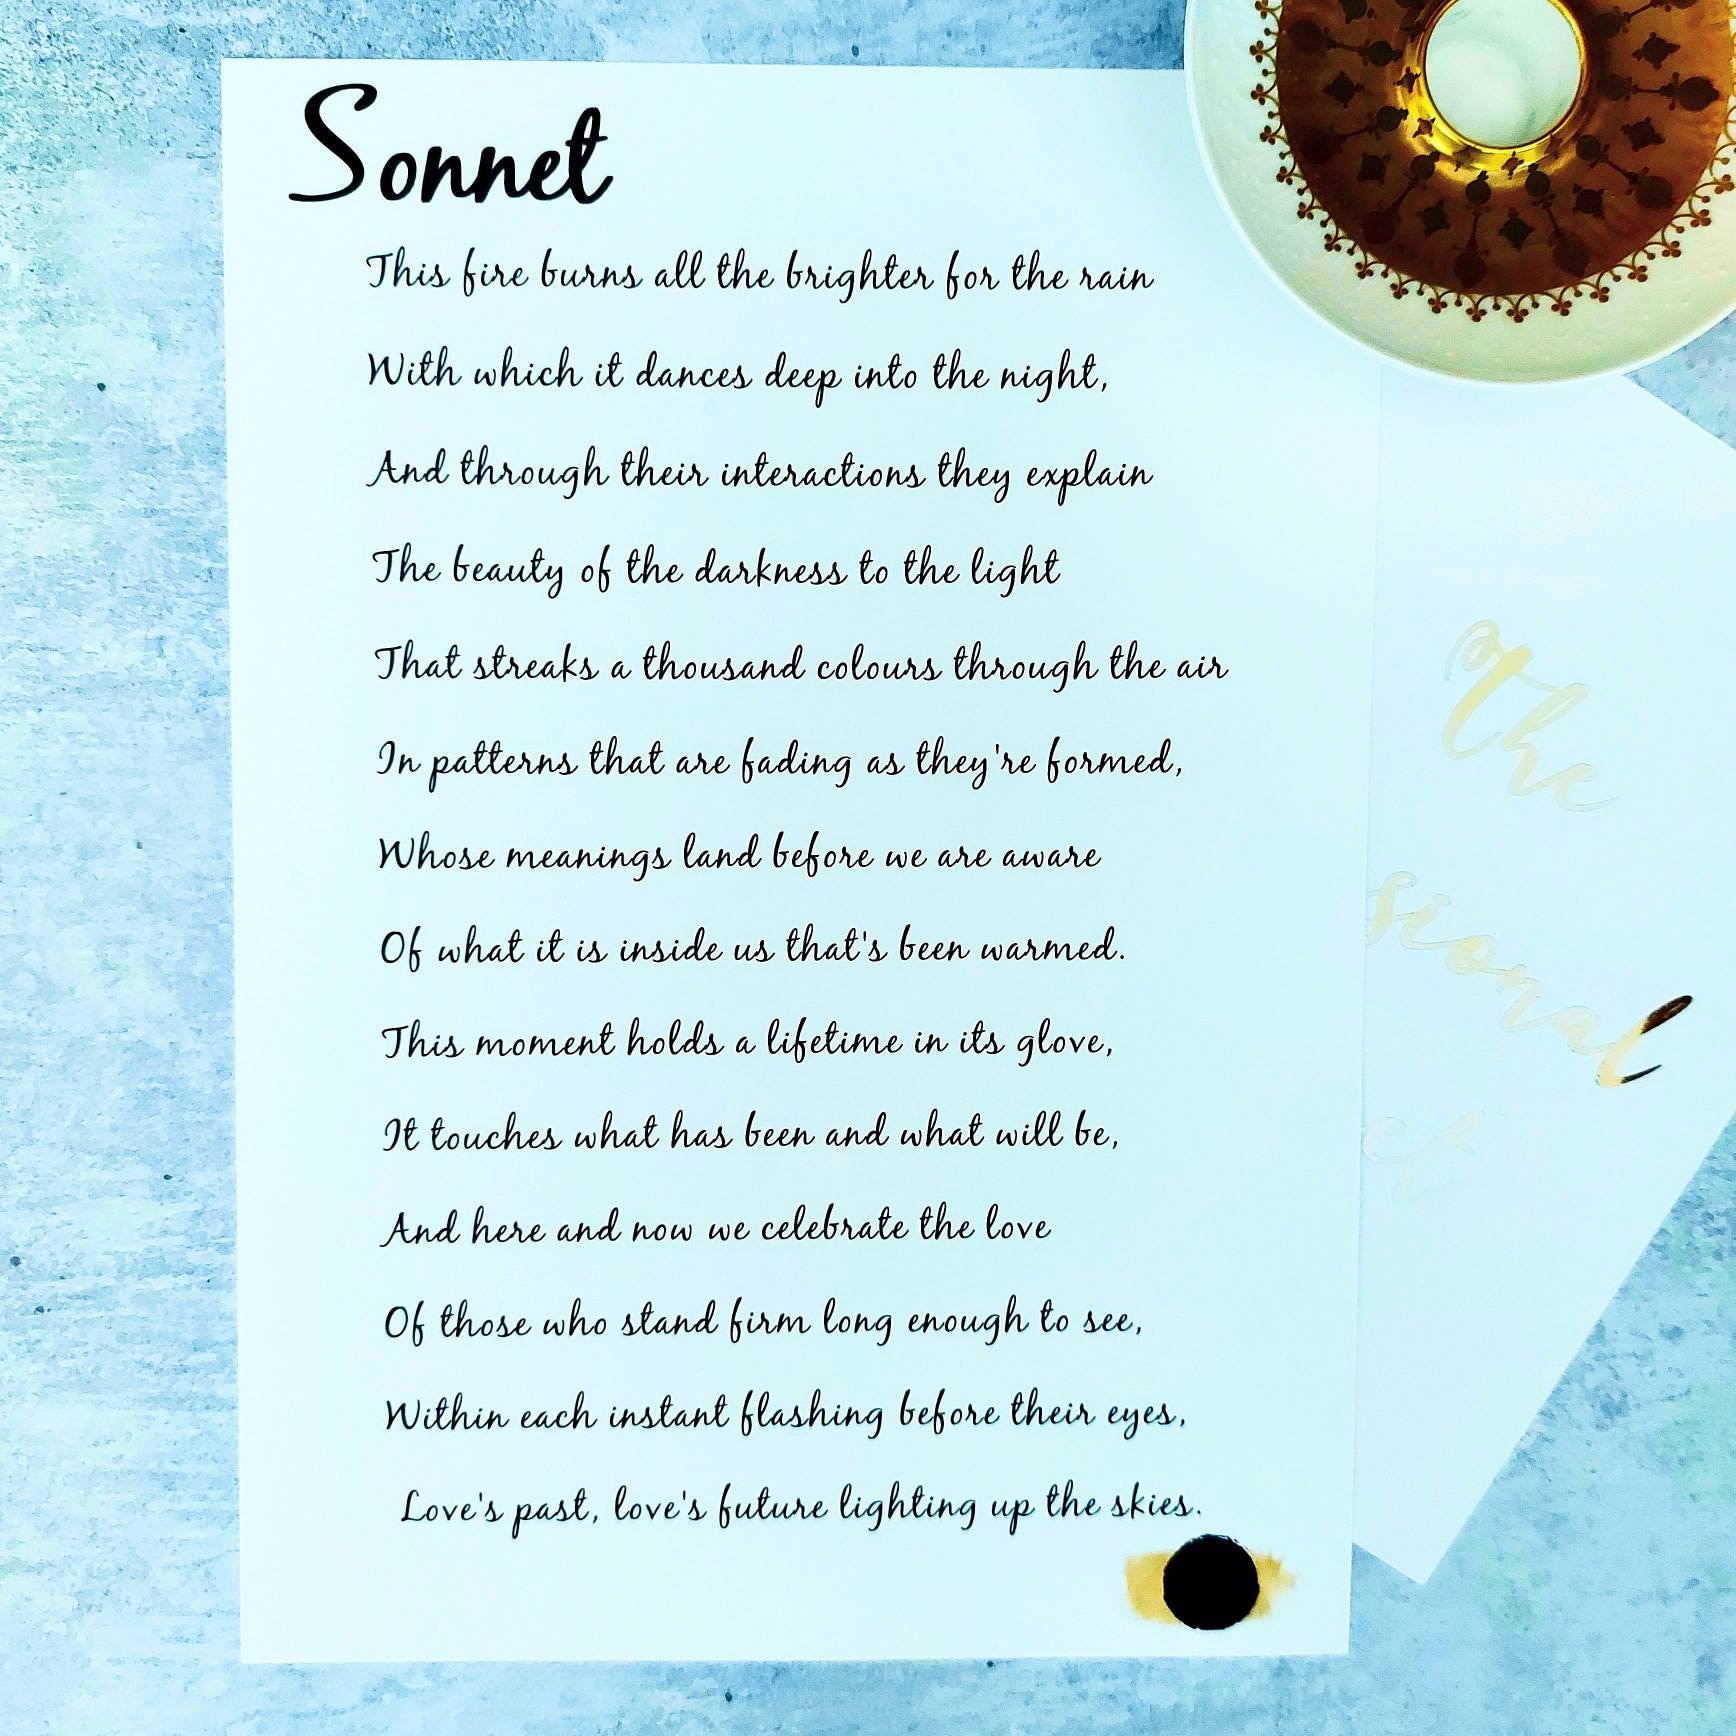 example of sonnet in creative writing